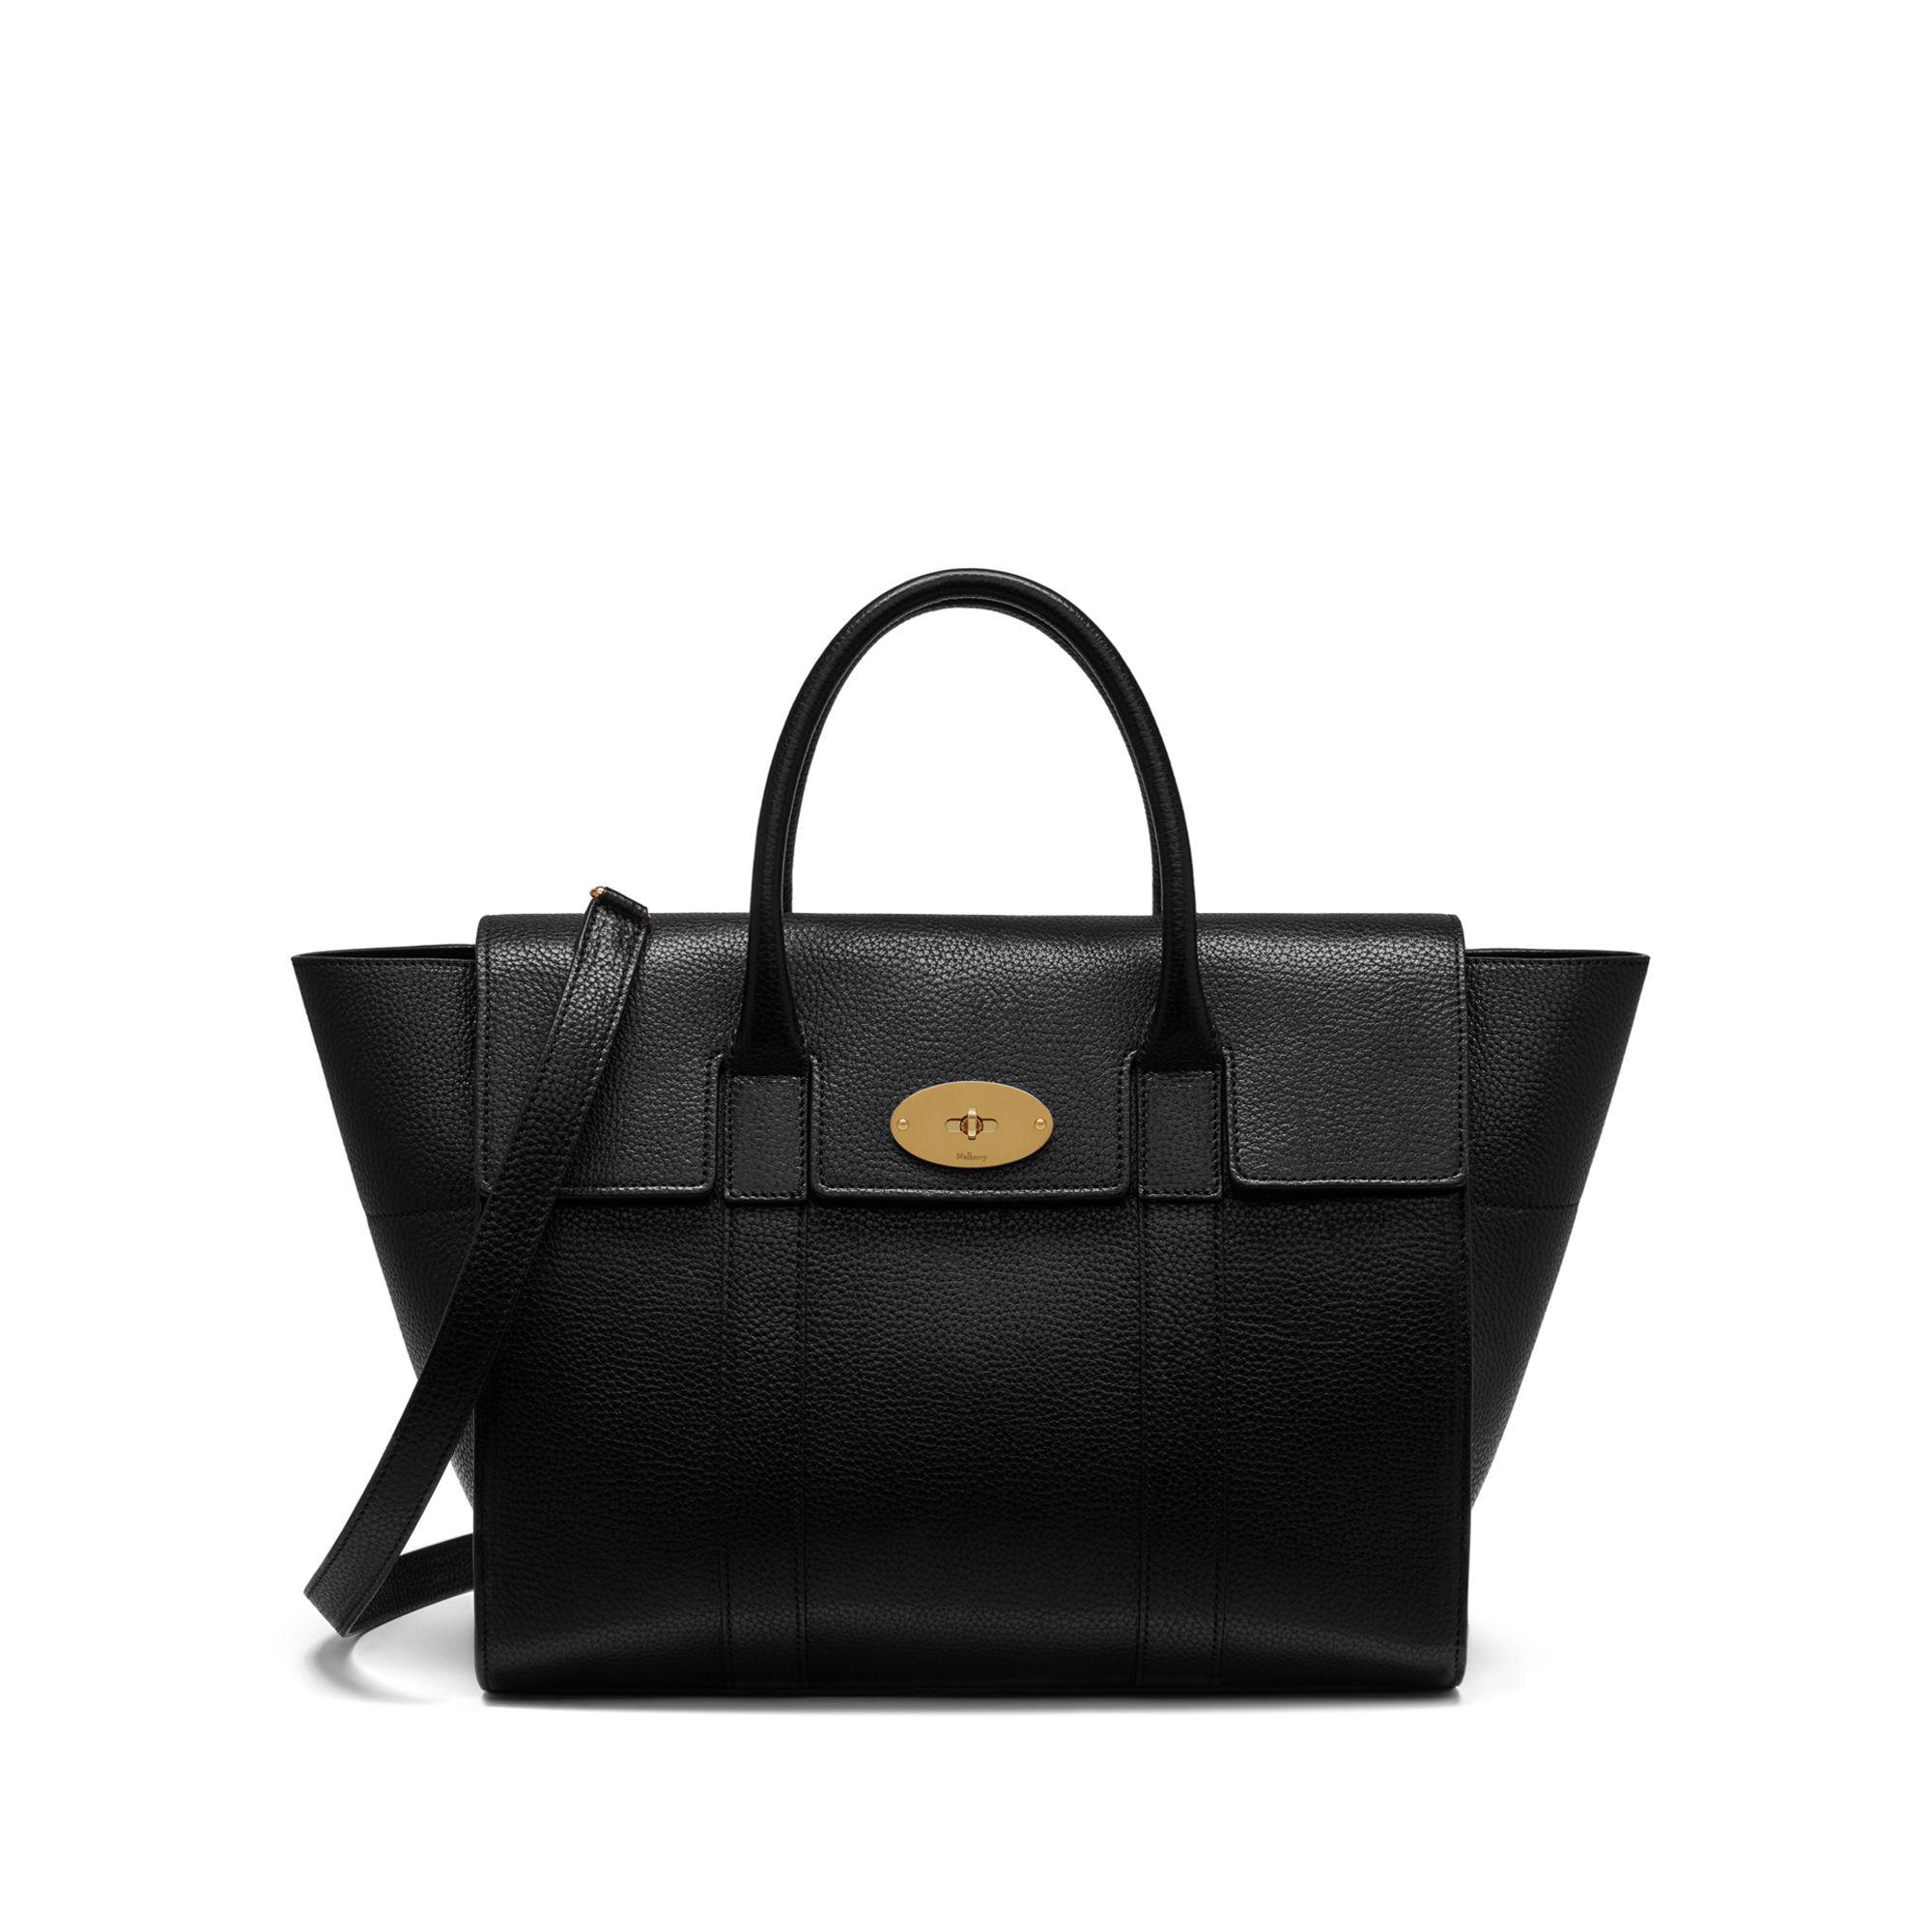 Lyst - Mulberry Bayswater With Strap In Black Small Classic Grain in Black